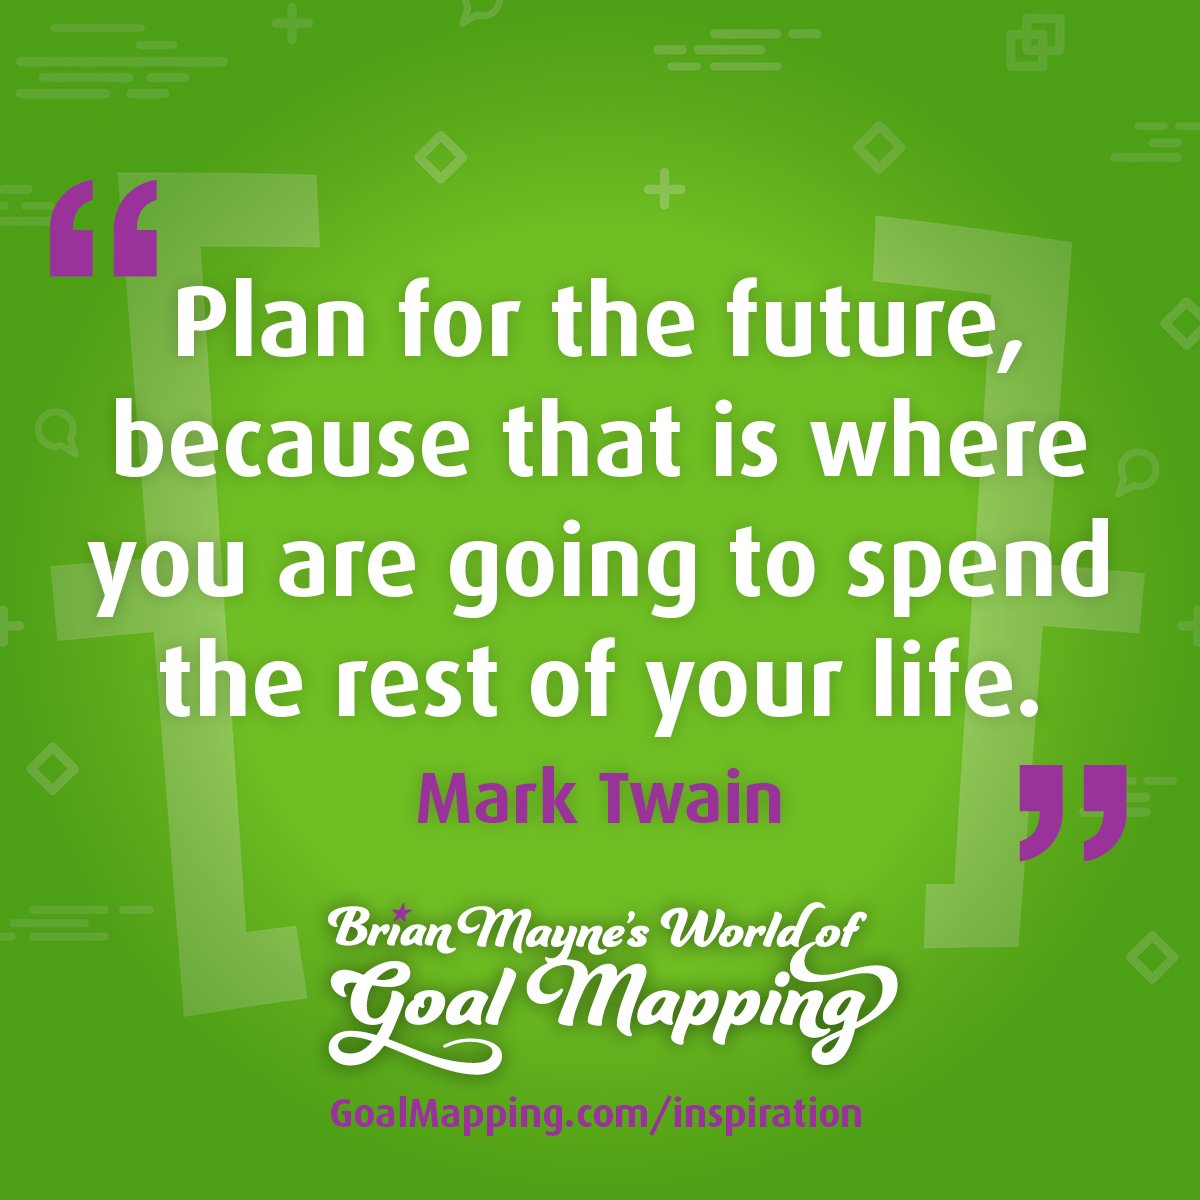 "Plan for the future, because that is where you are going to spend the rest of your life." Mark Twain